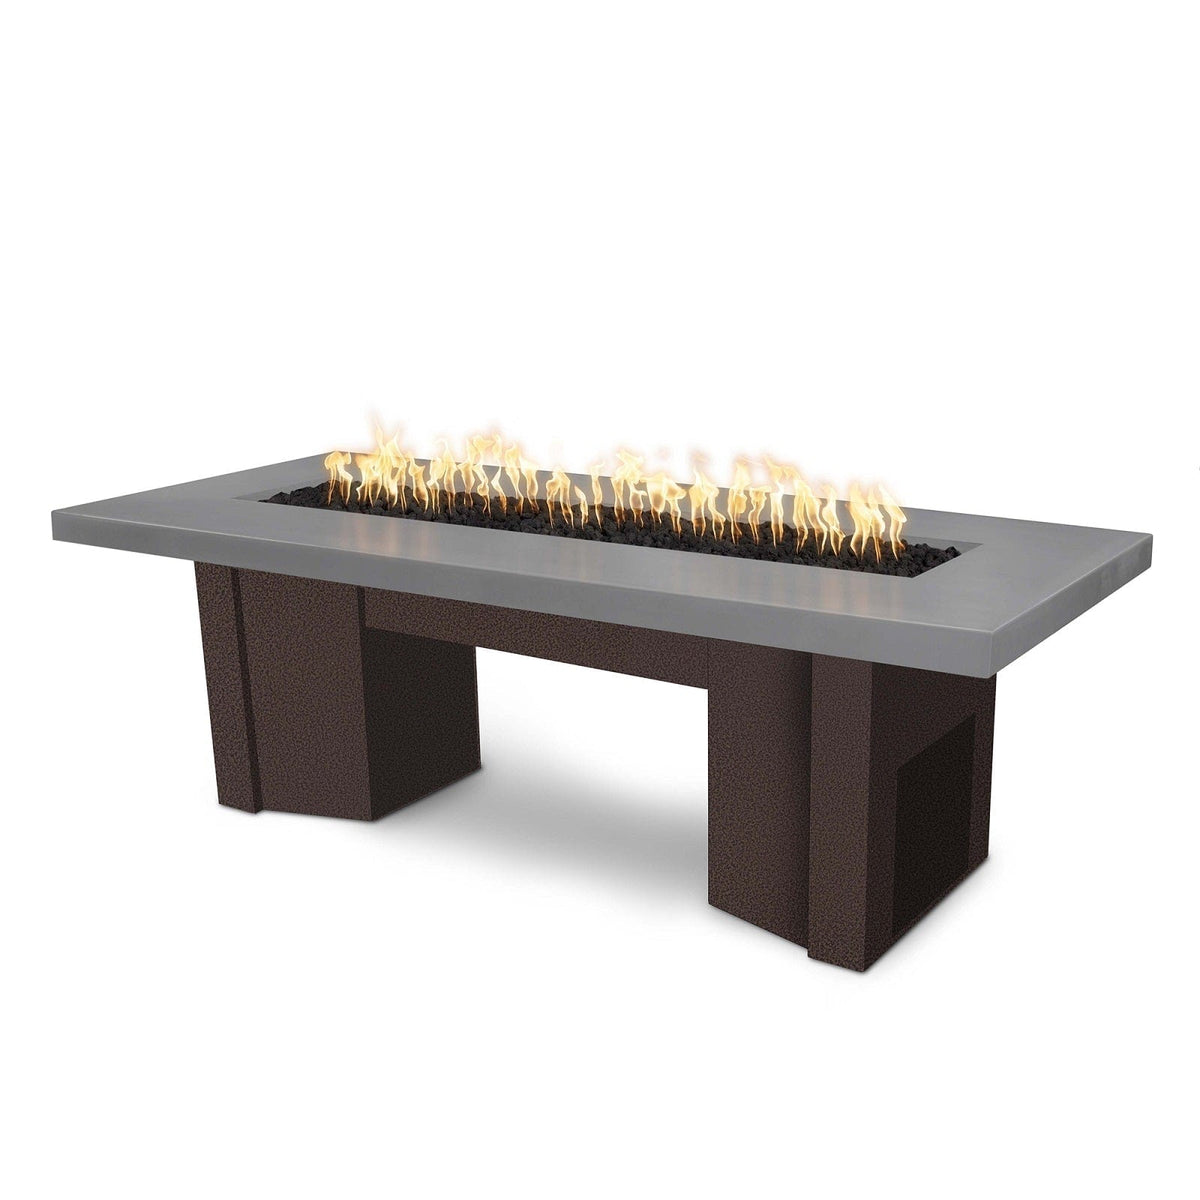 The Outdoor Plus Fire Features Natural Gray (-NGY) / Copper Vein Powder Coated Steel (-CPV) The Outdoor Plus 78&quot; Alameda Fire Table Smooth Concrete in Liquid Propane - Match Lit / OPT-ALMGFRC78-LP